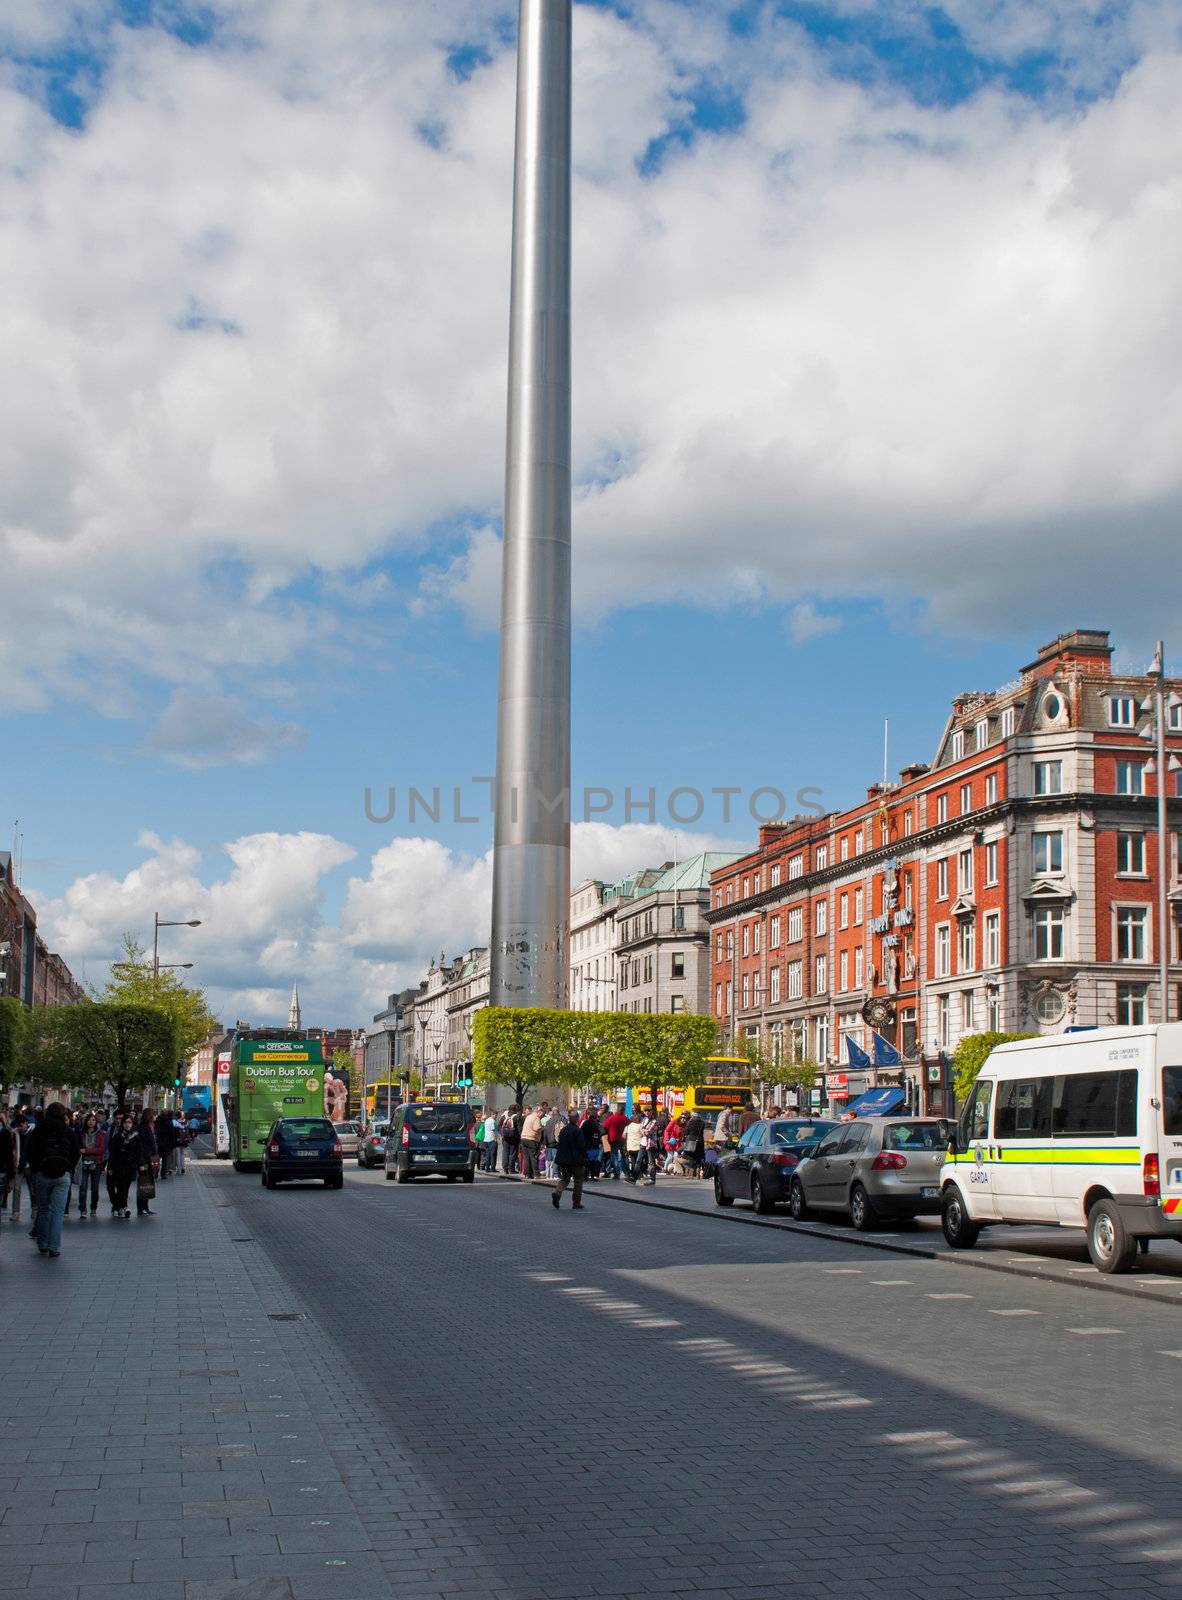 DUBLIN, IRELAND - MAY 12: tourists visiting The Spire of Dublin at the famous O'Connell street on May 12, 2012 in Dublin, Ireland. It has 121.2 metres and costs 4 Million Euros.